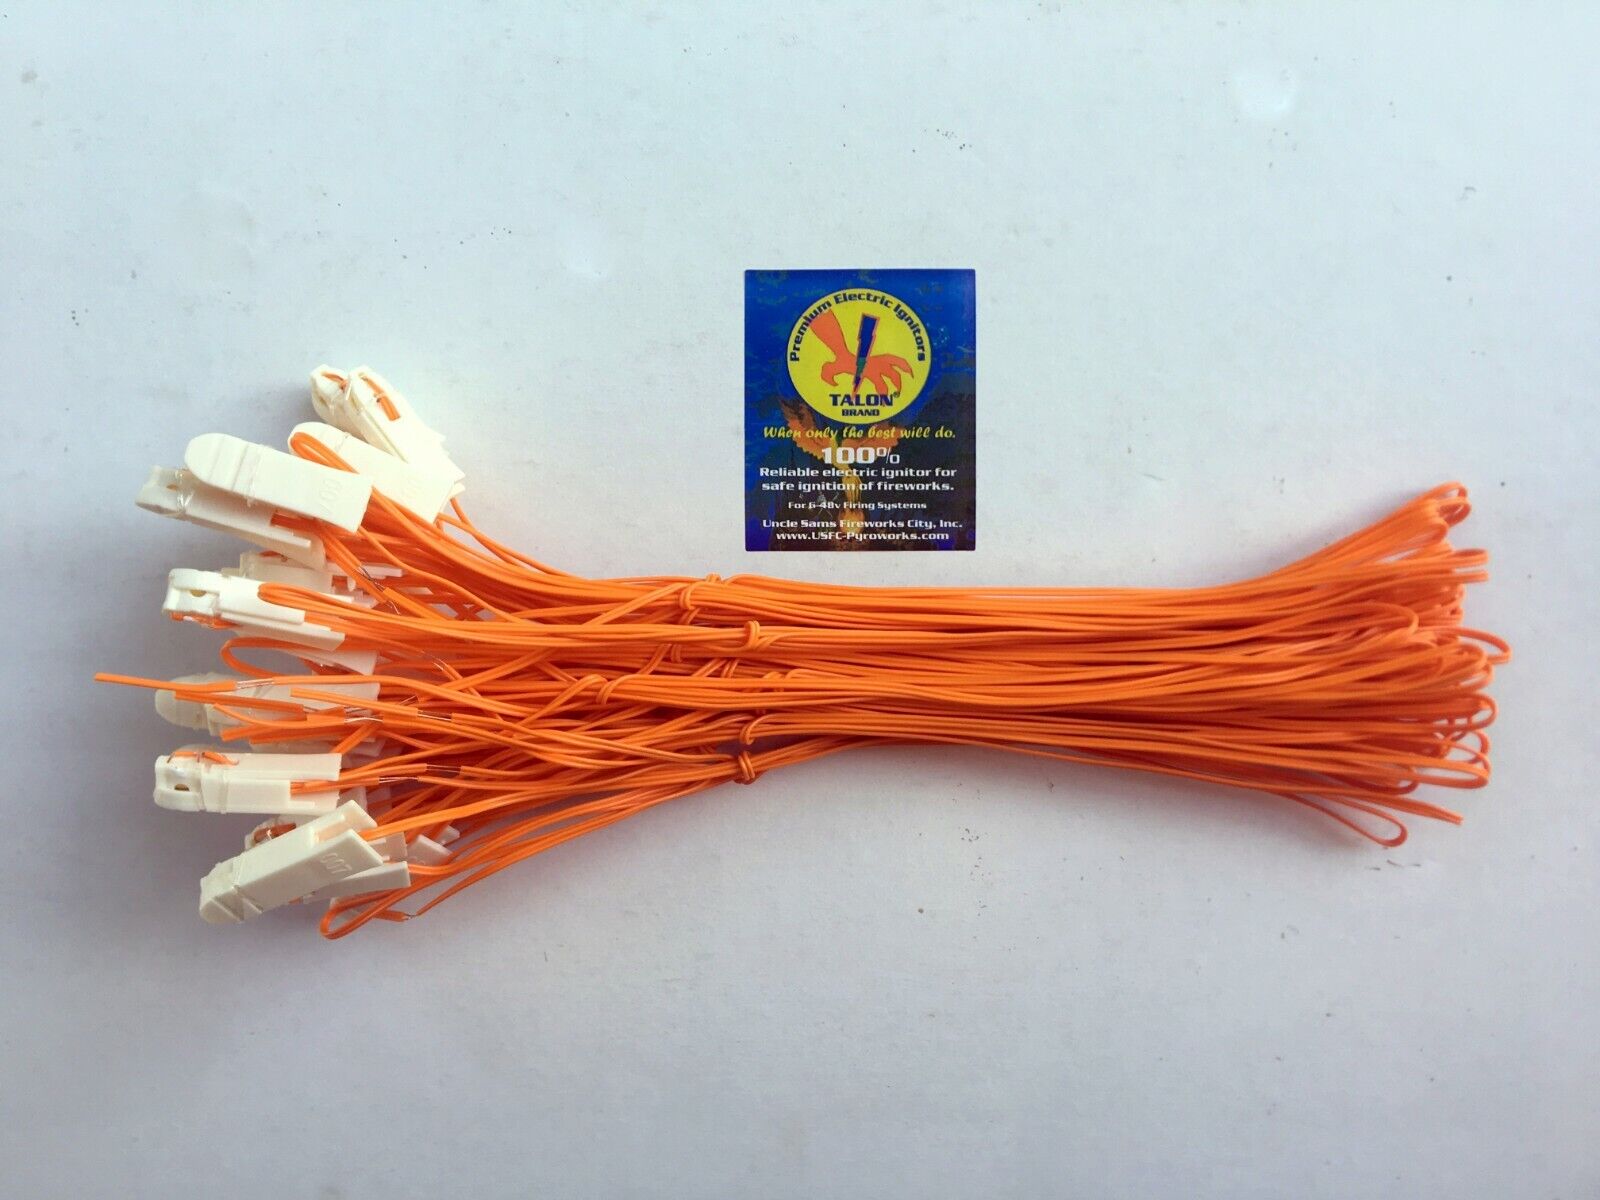 Genuine 1M Talon® Igniter (1 meter lead wires) for Fireworks Firing System-25pc,